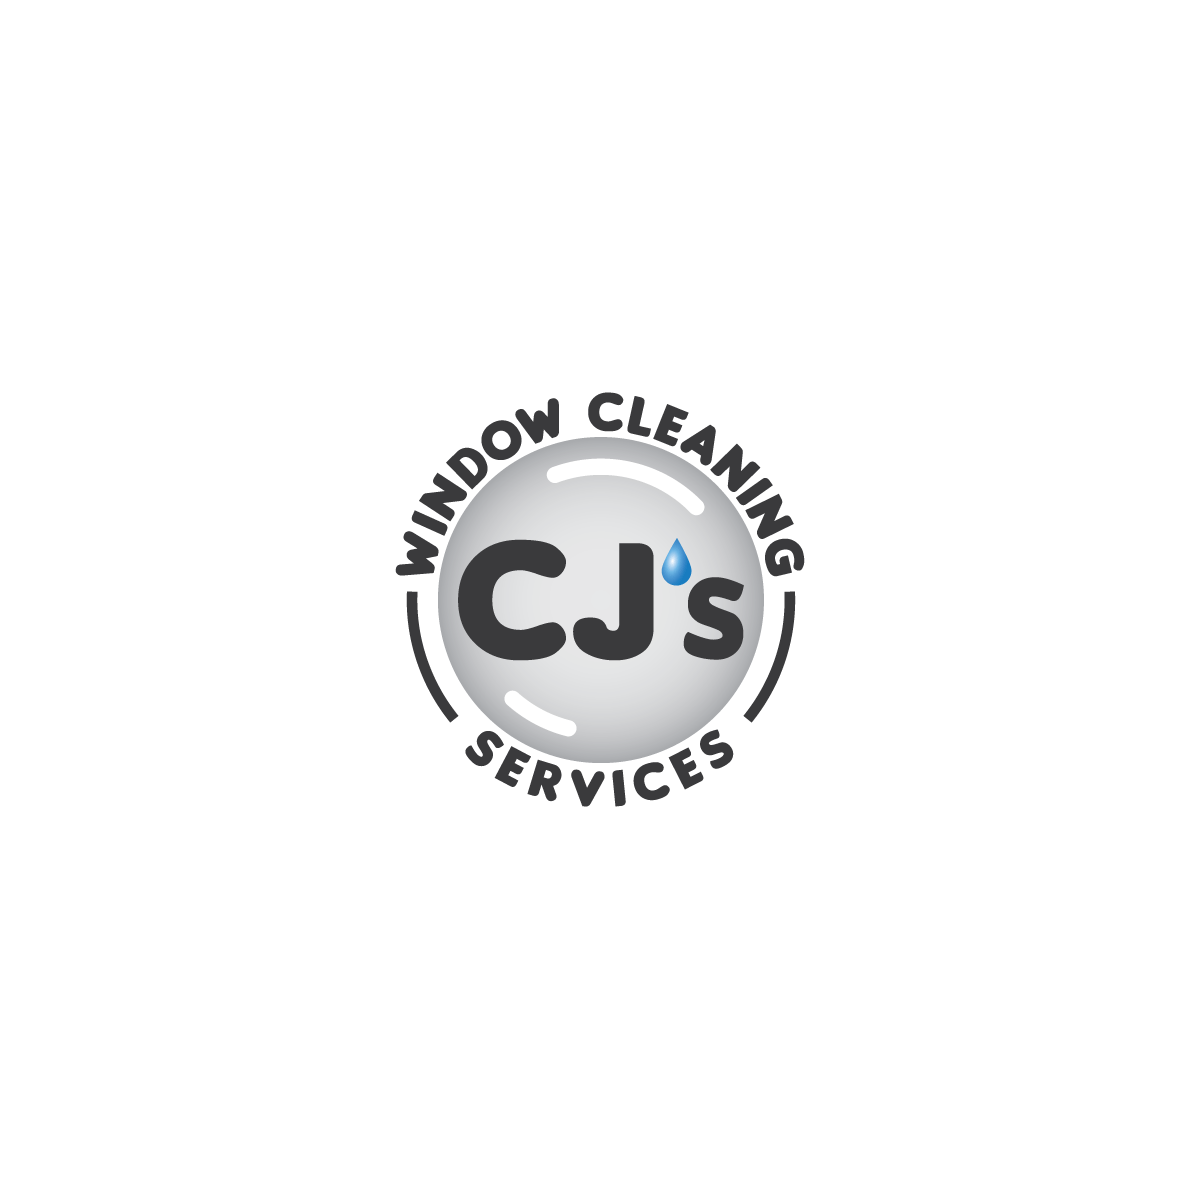 CJ's Window Cleaning Services Logo